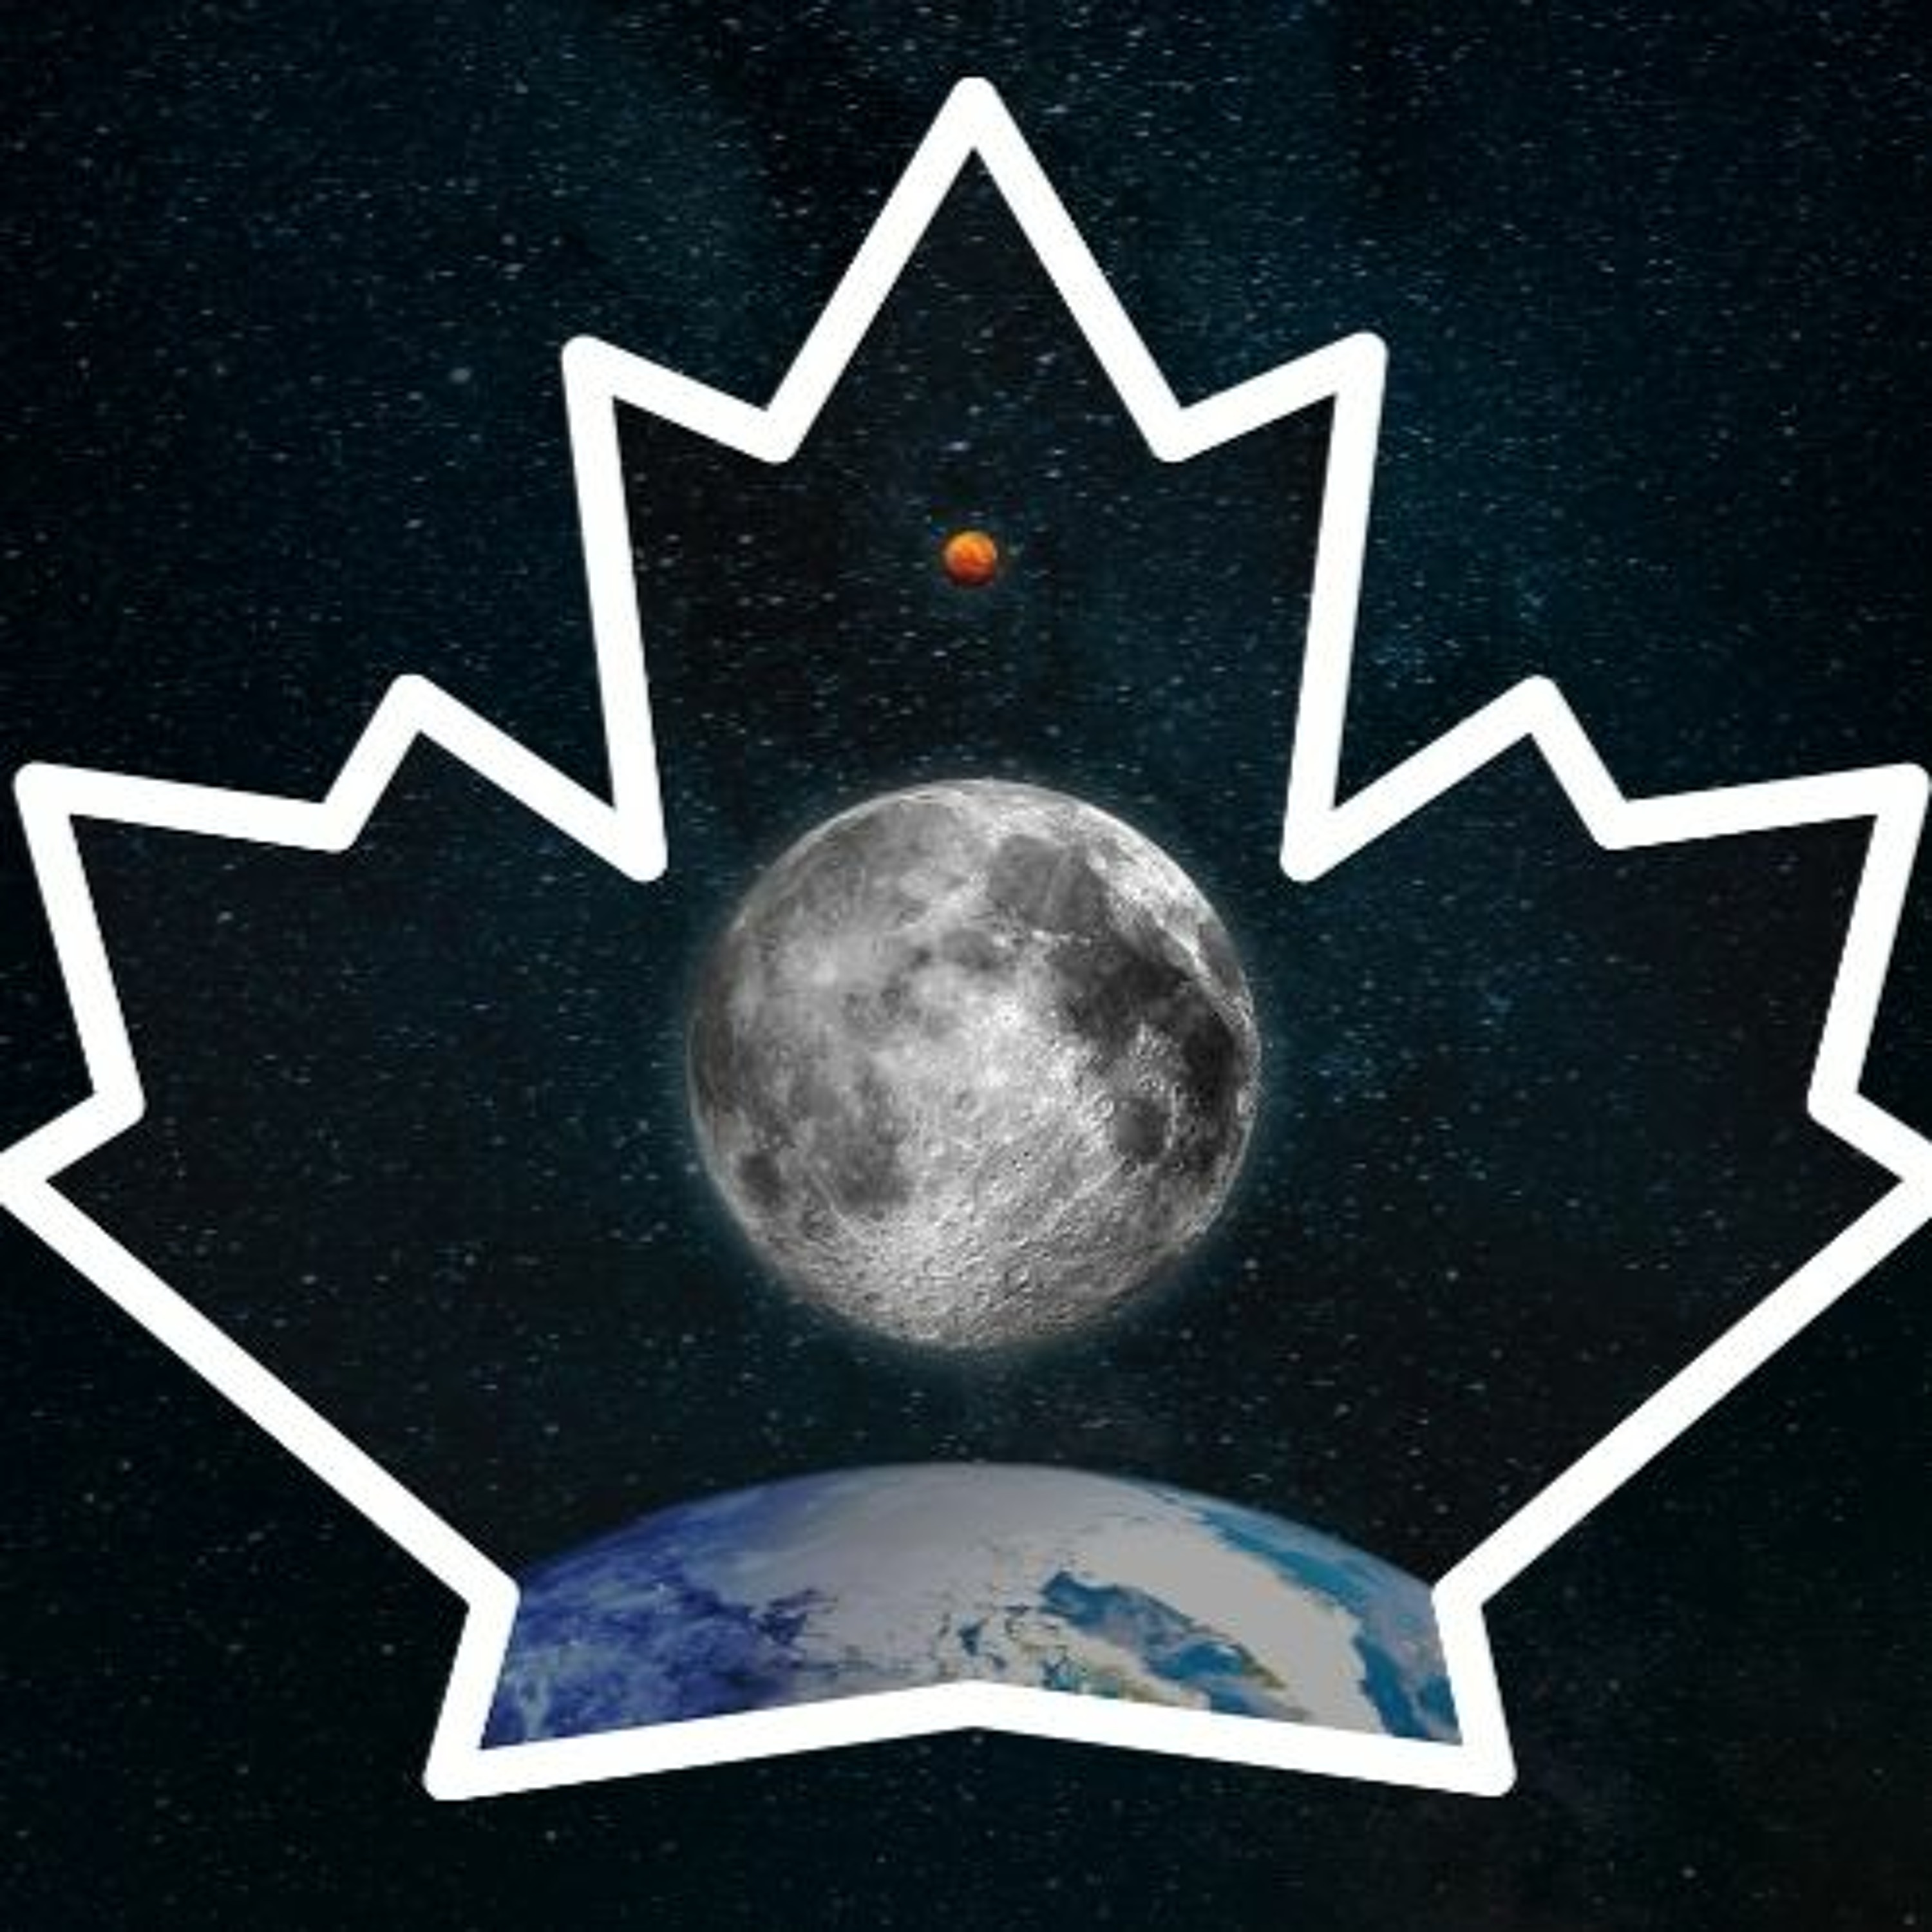 Canadians Asked to Guide Future Space Exploration Activities